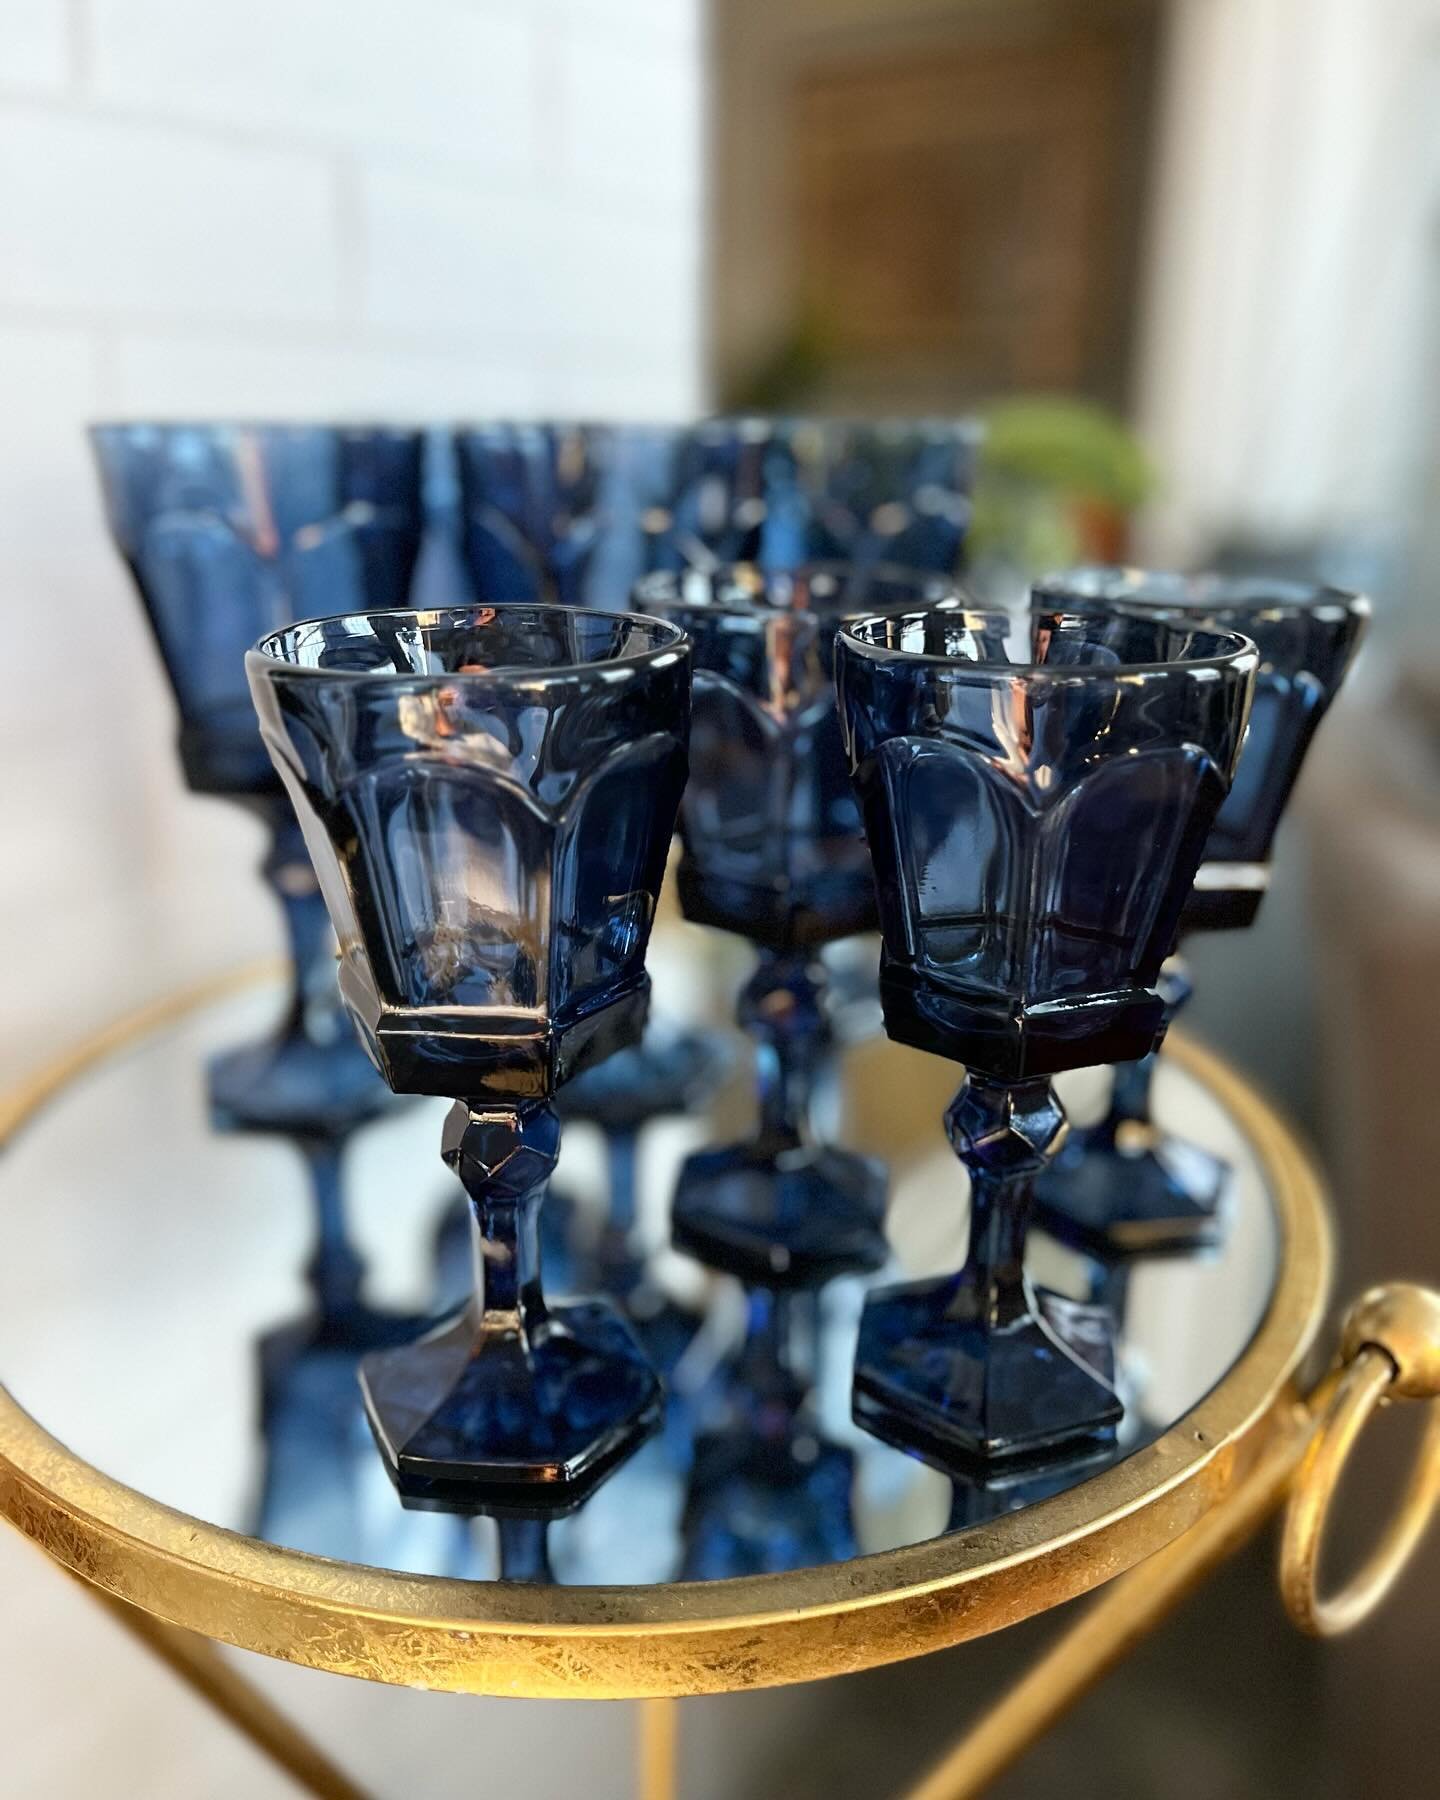 Stunning Fostoria Virginia Dark Blue Claret Goblet Glasses. Set of 4 Wine Goblets: $68. Set of 4 Water Goblets: $64.

Vintage items are pre-owned and may show signs of age, love, and character.

- Comment SOLD on item or DM to purchase. 
- Venmo and 